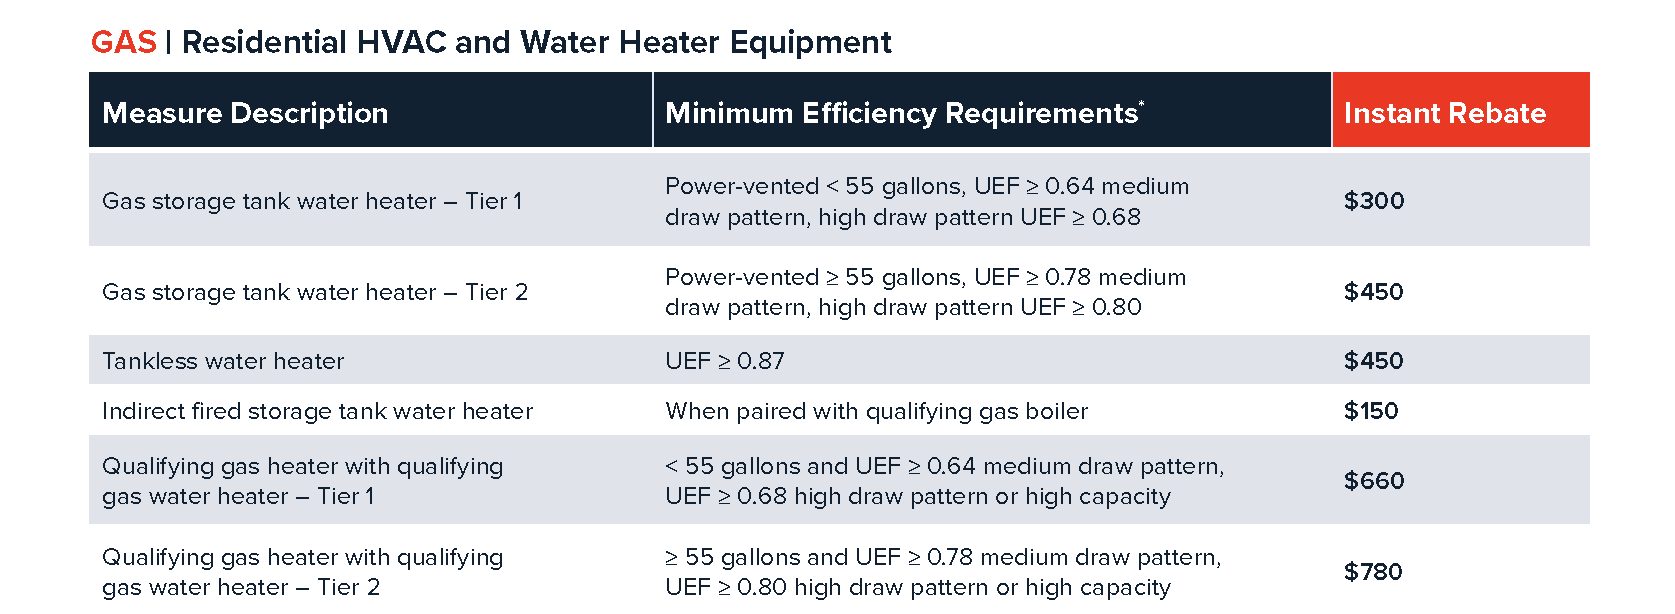 Hot Water Heater Measures PSE&G